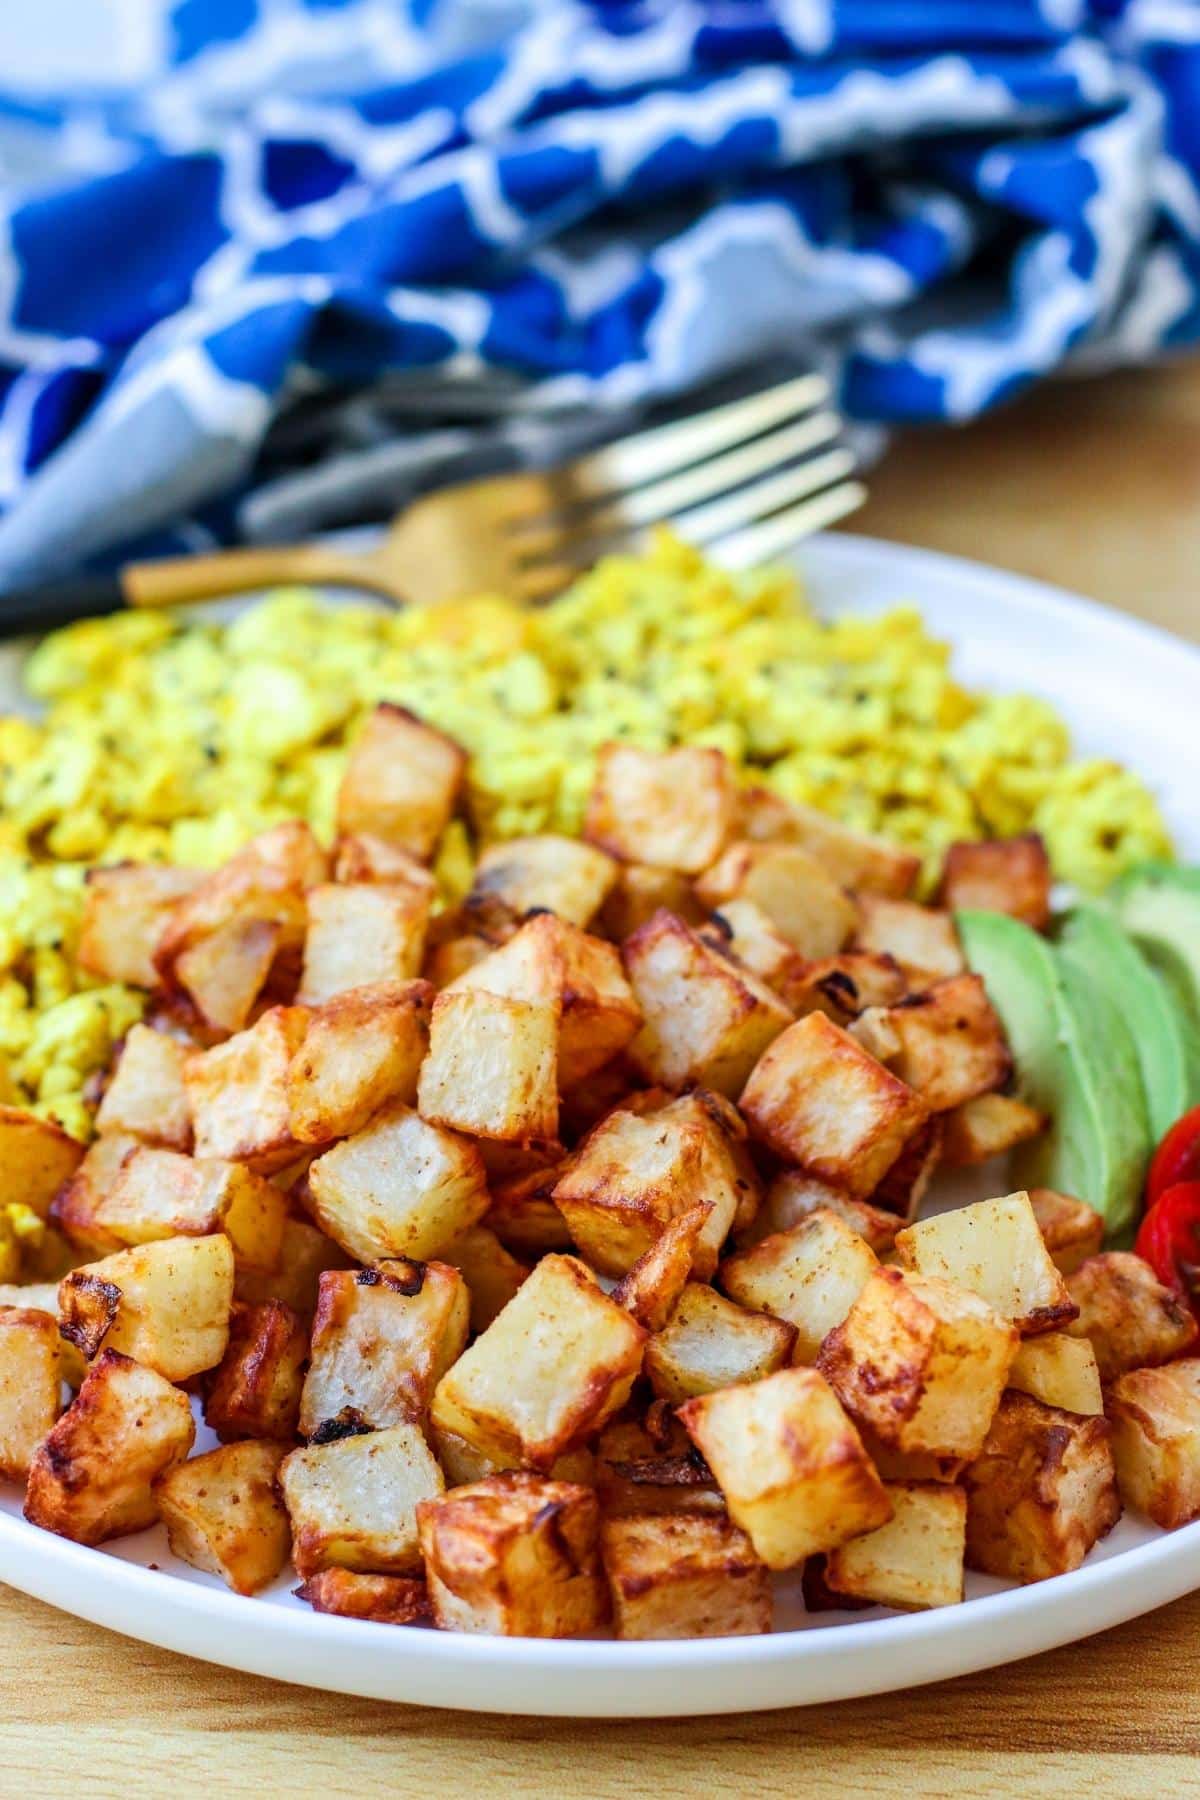 Home fries on a plate with tofu scramble and avocado and tomato slices.